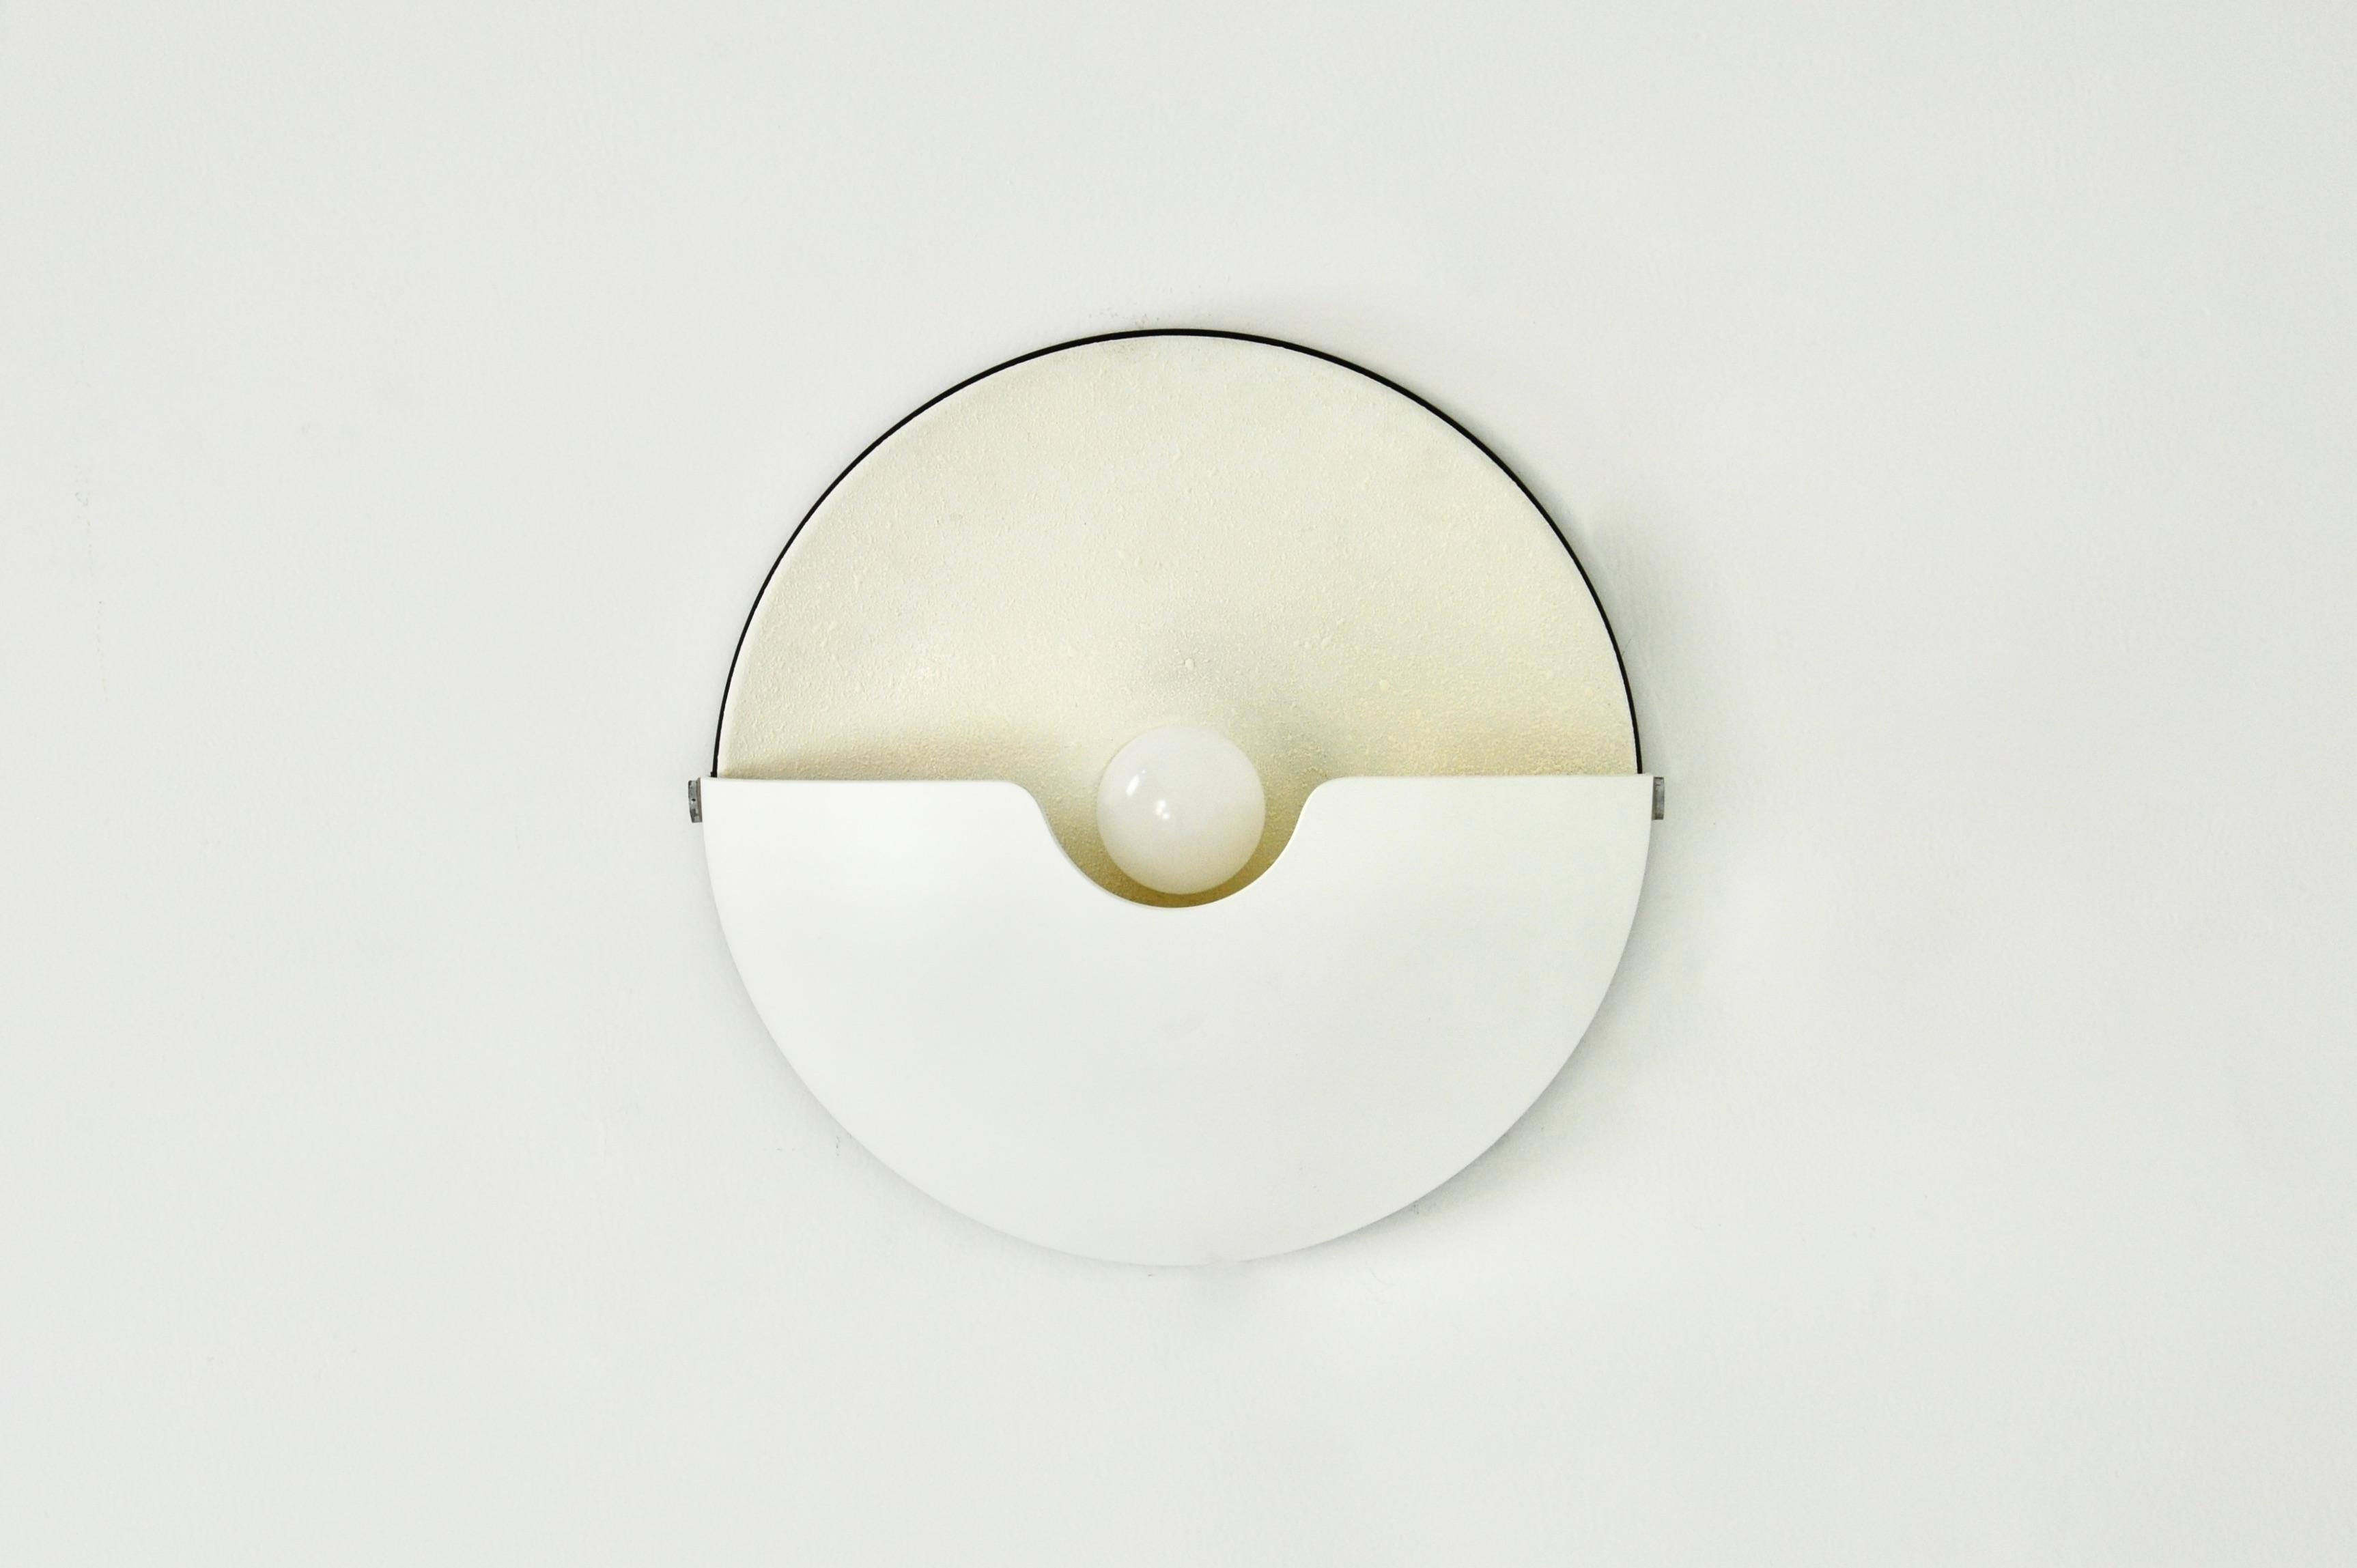 Wall light in white plastic. Light projection can be tilted up or down.  Mezzanotte model. Wear due to time and age of the wall light.